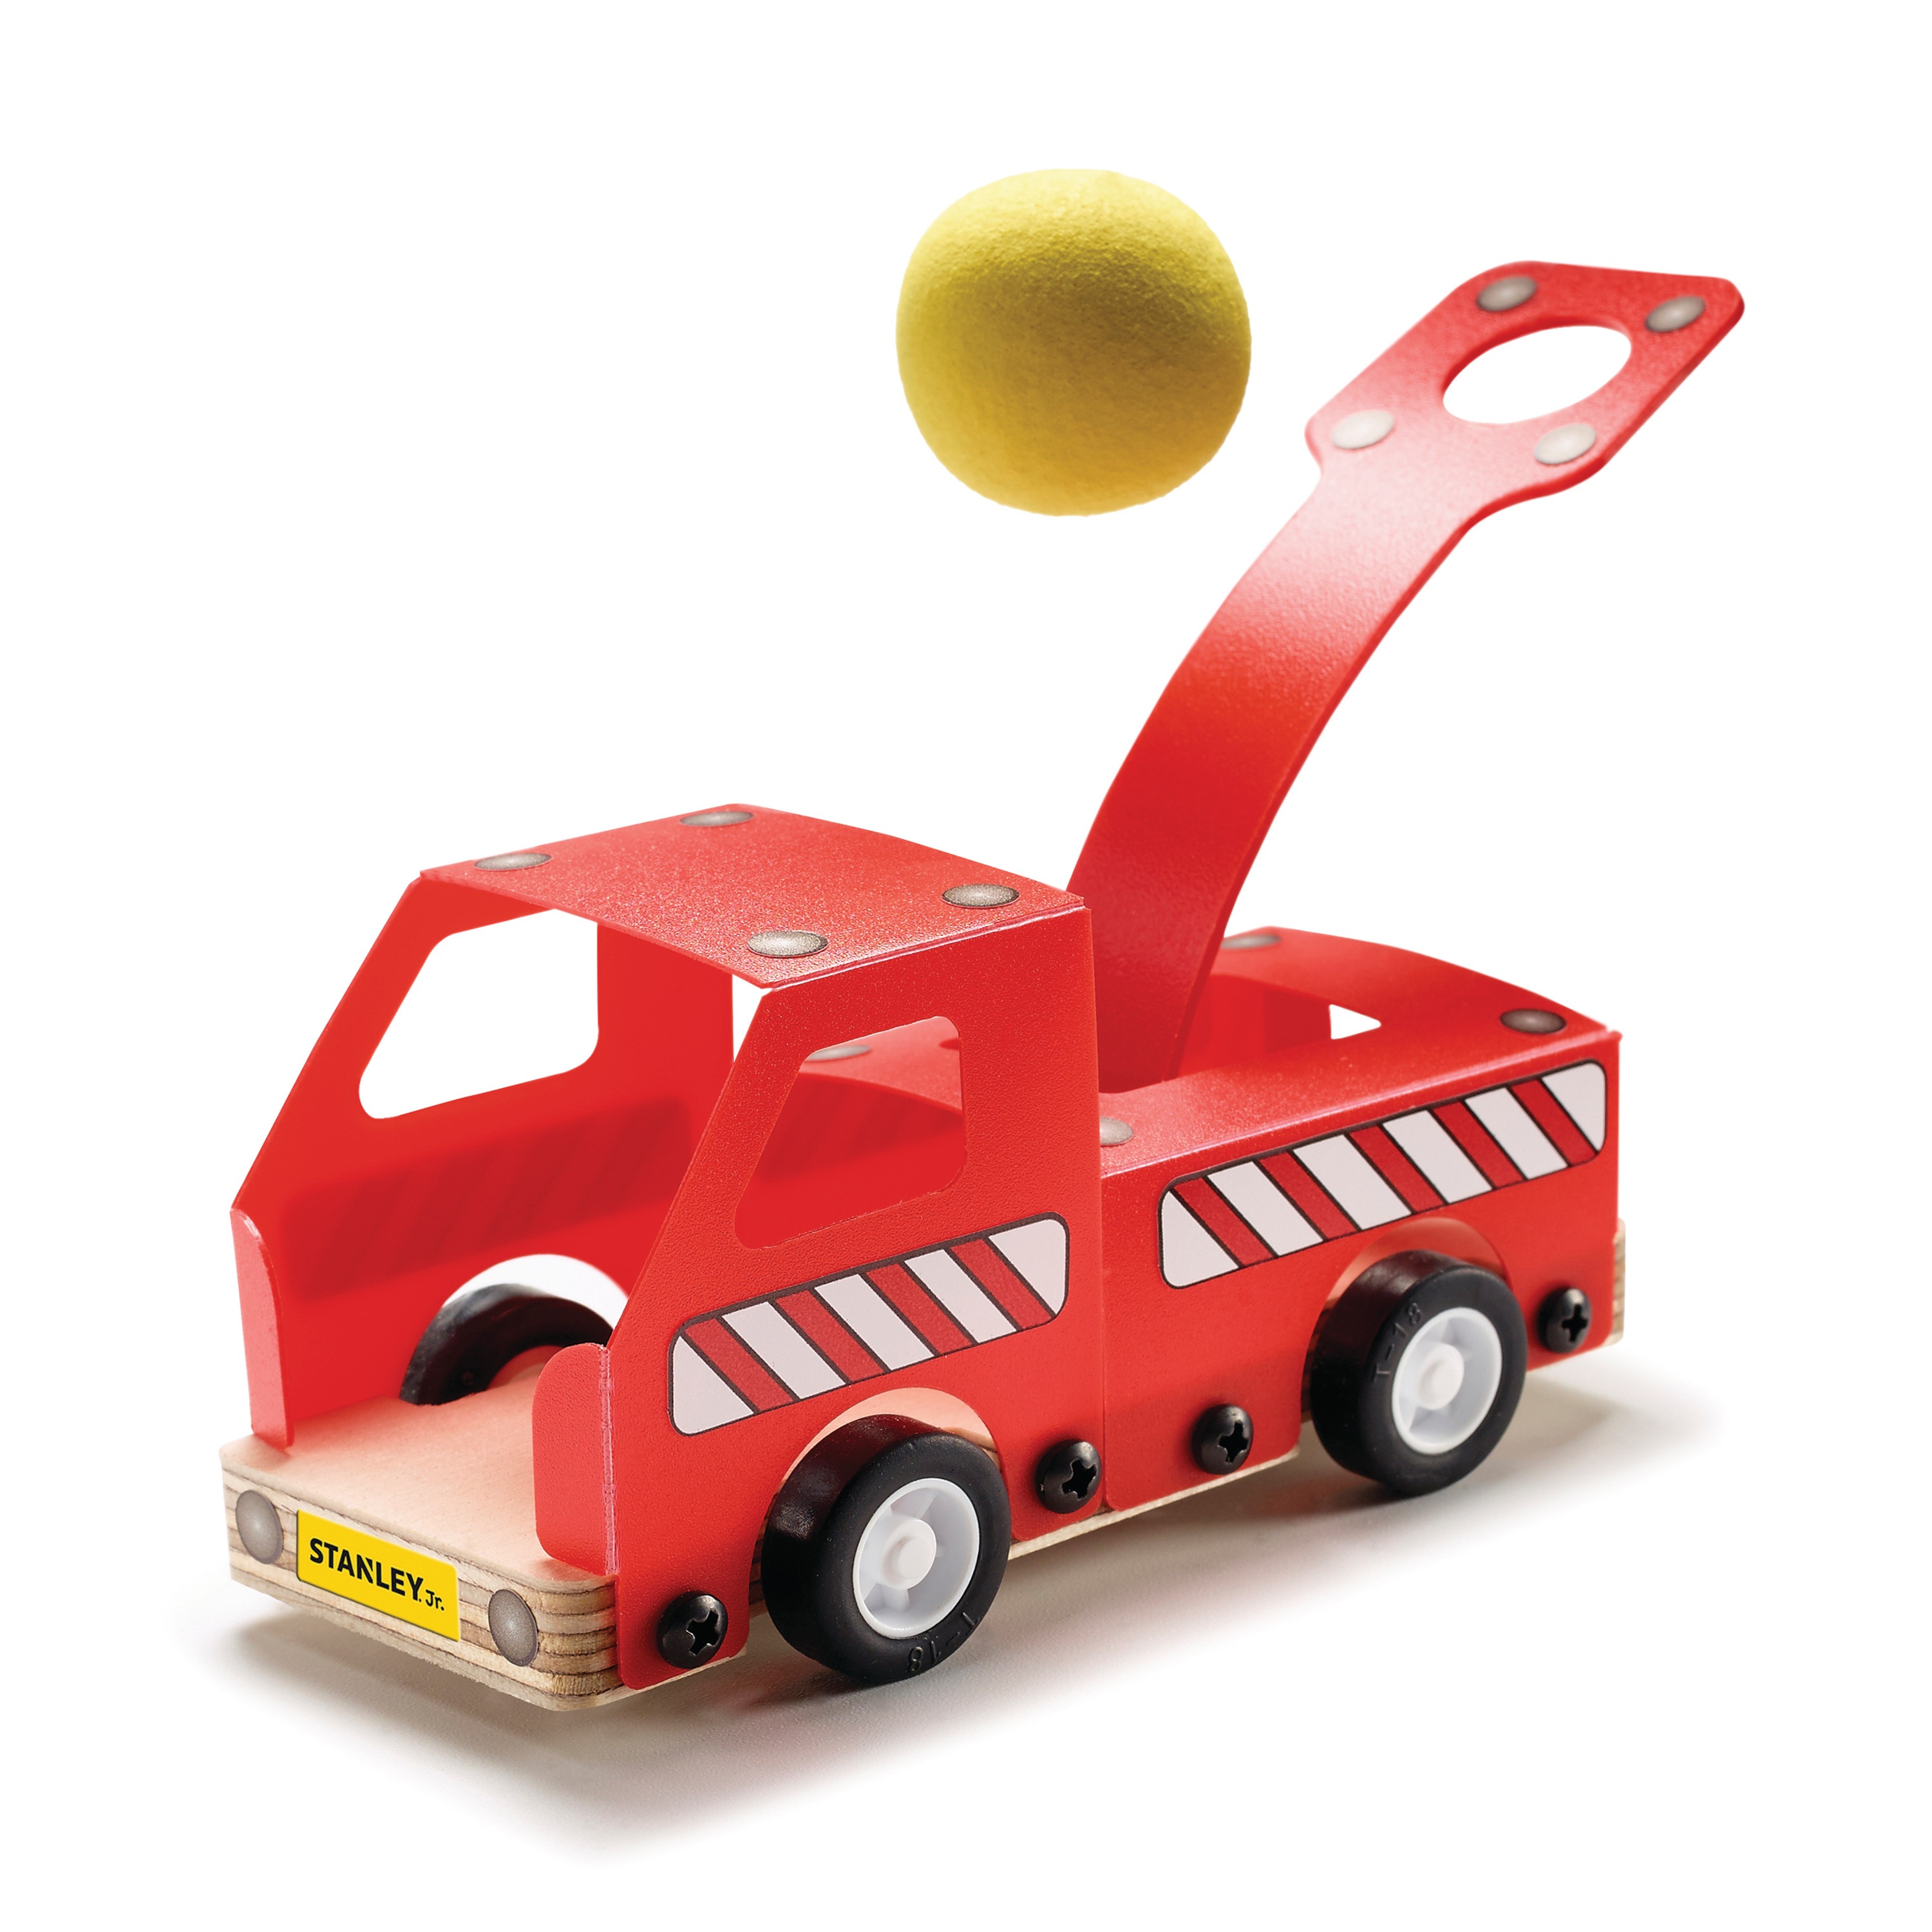 Stanley Tools - Catapult Truck - OK020-SY